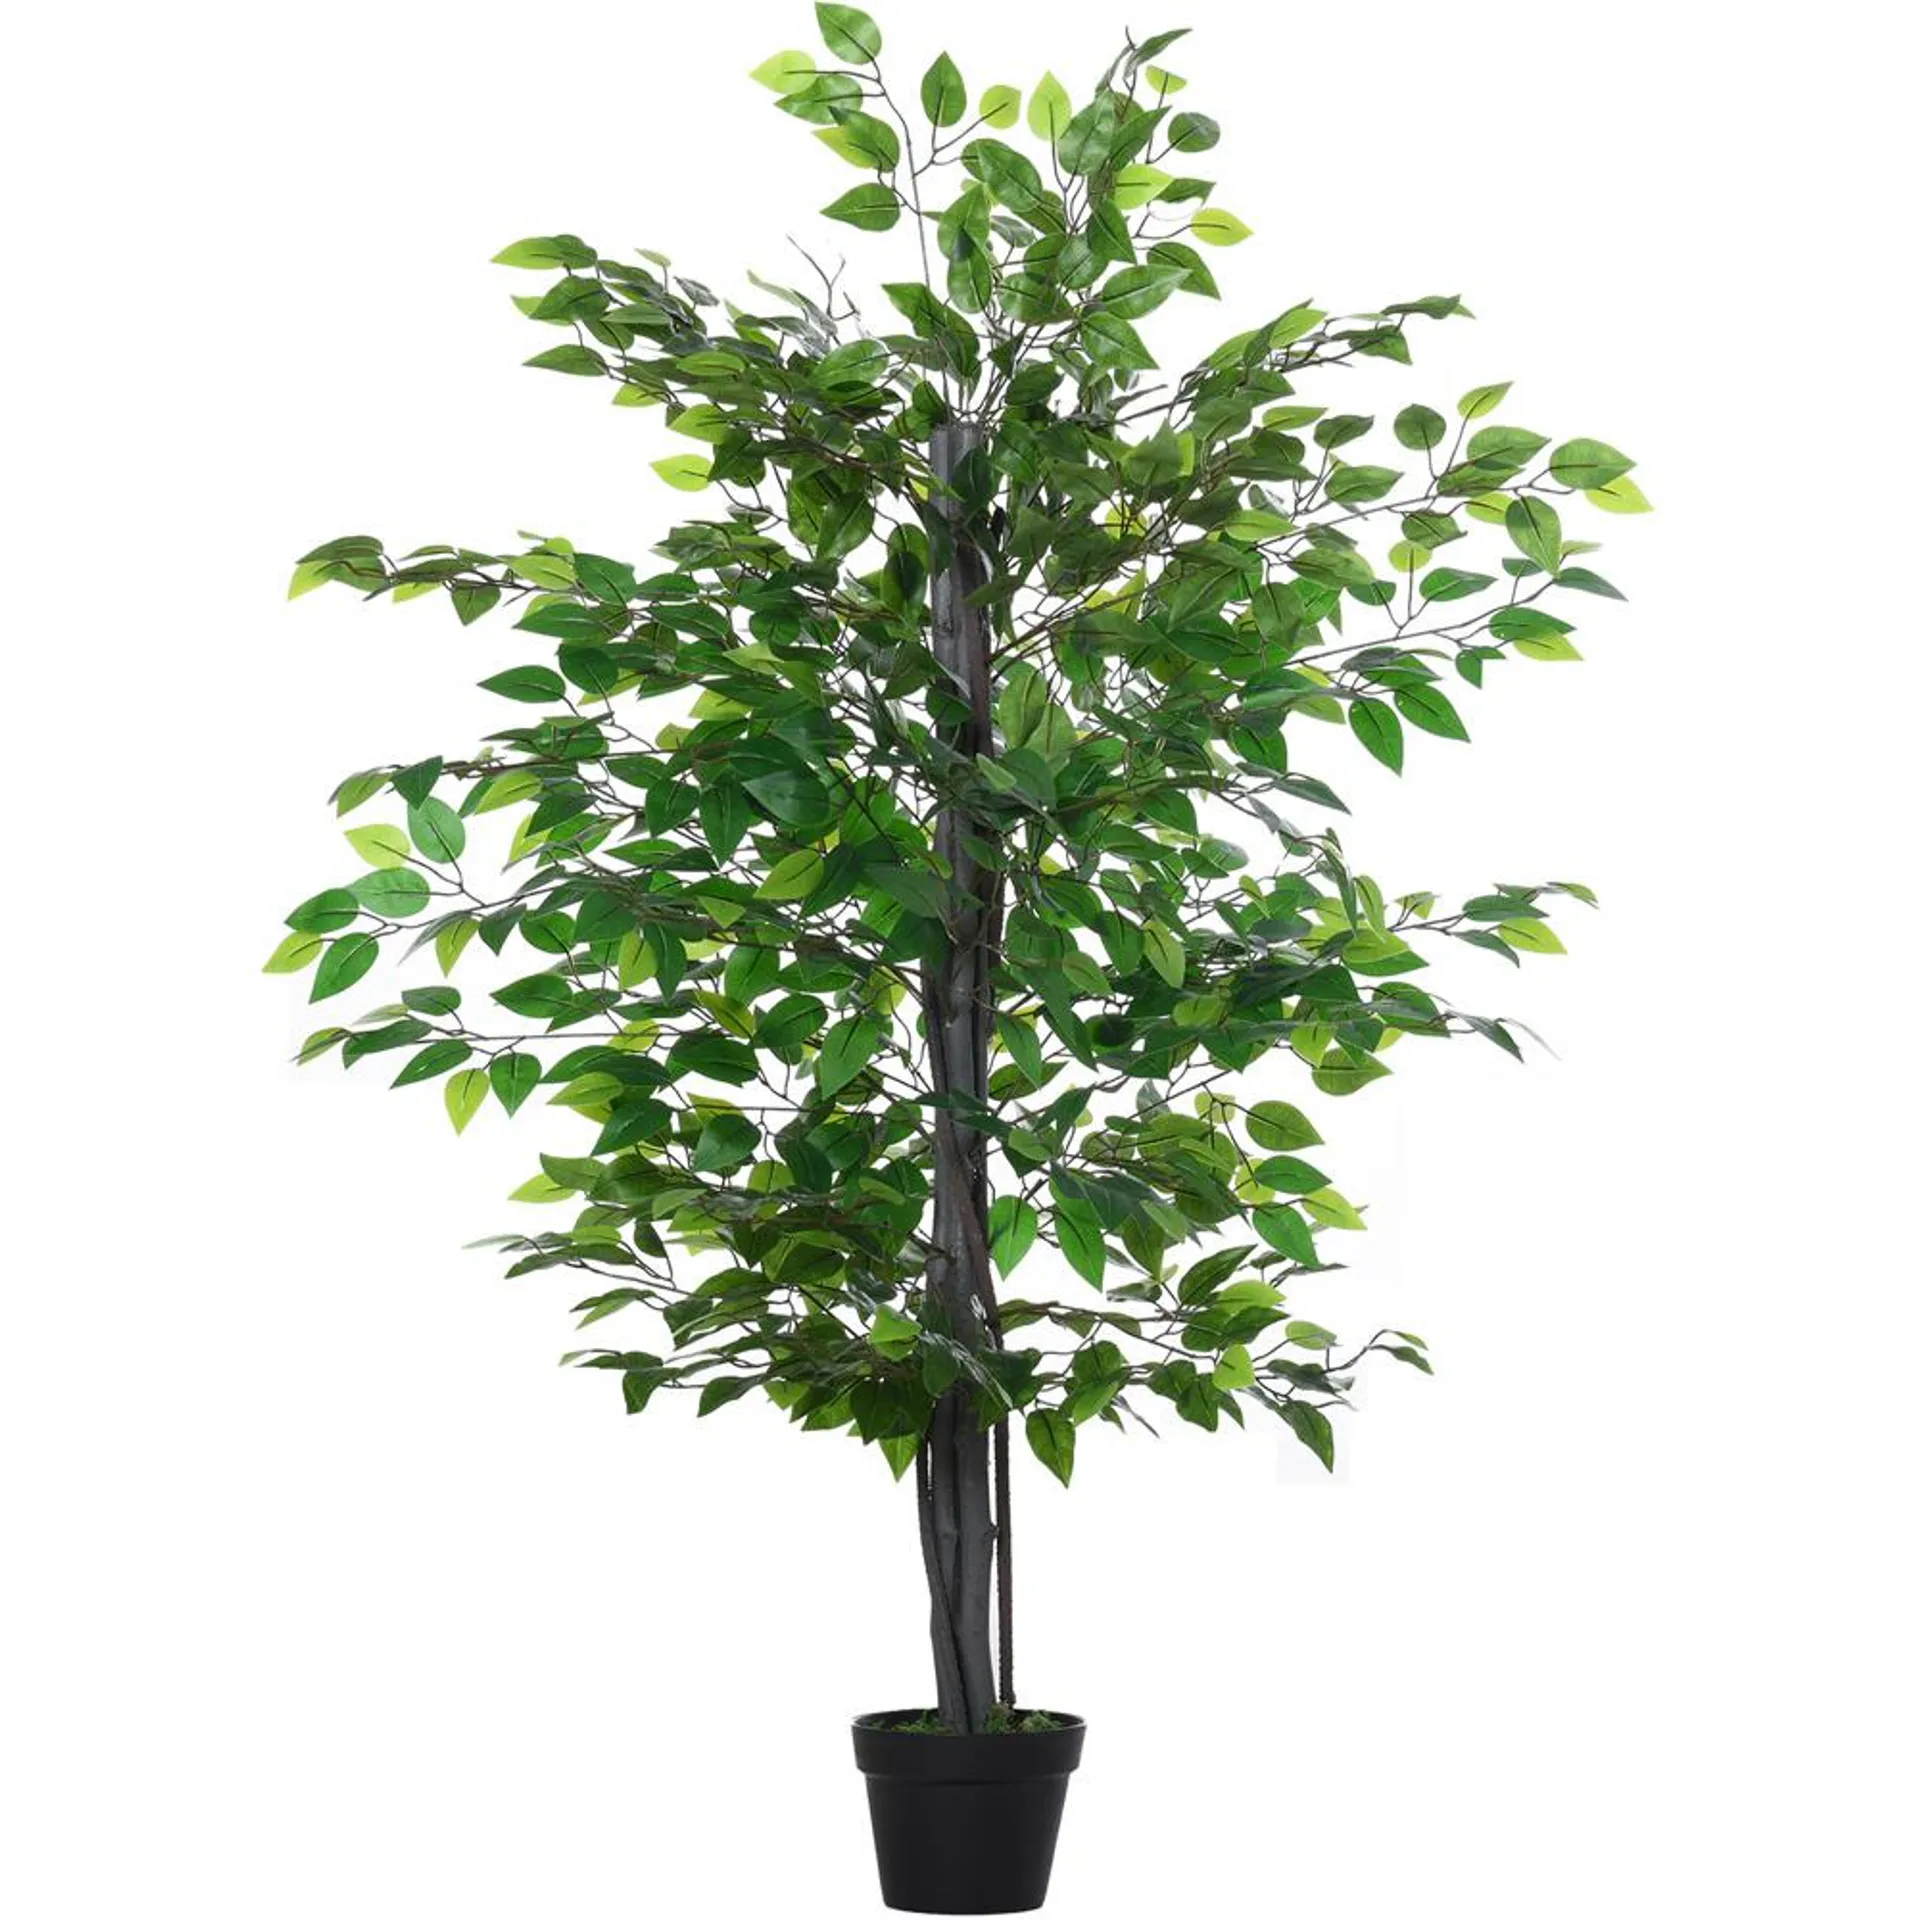 Outsunny Banyan Tree Artificial Plant In Pot 4.7ft